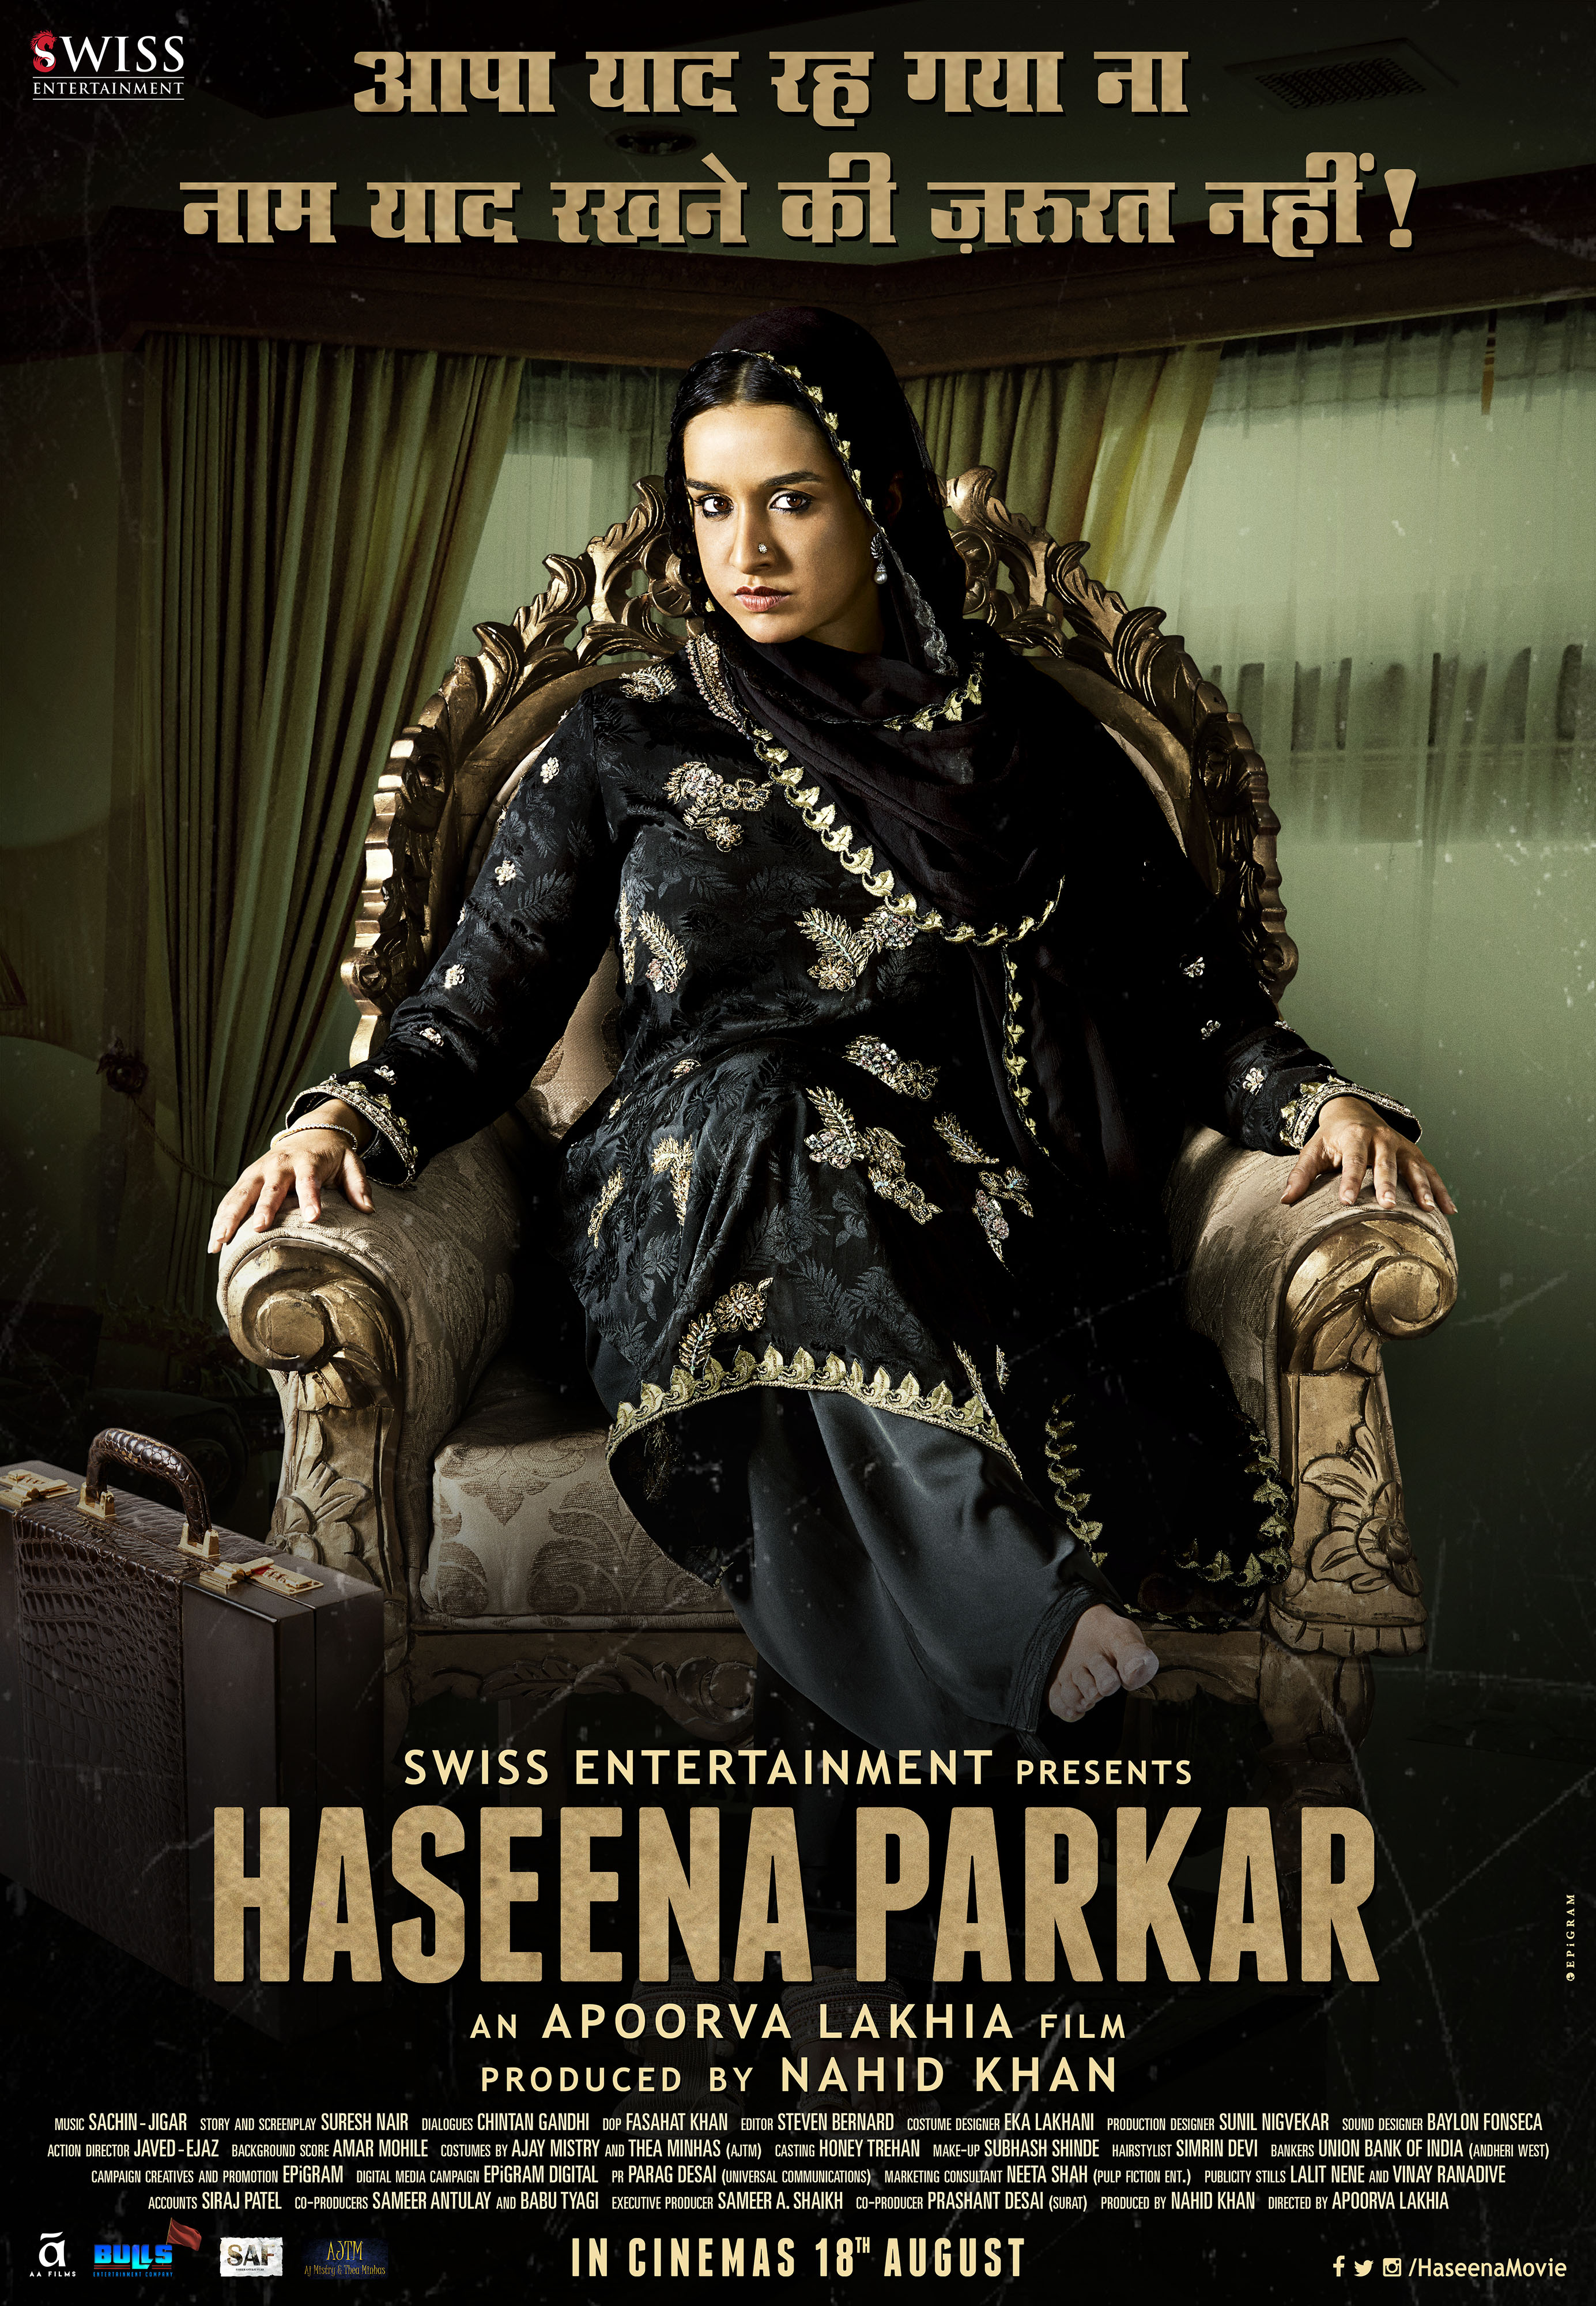 Haseena Parkar Twitter review: This is how the audience reacted to the movie